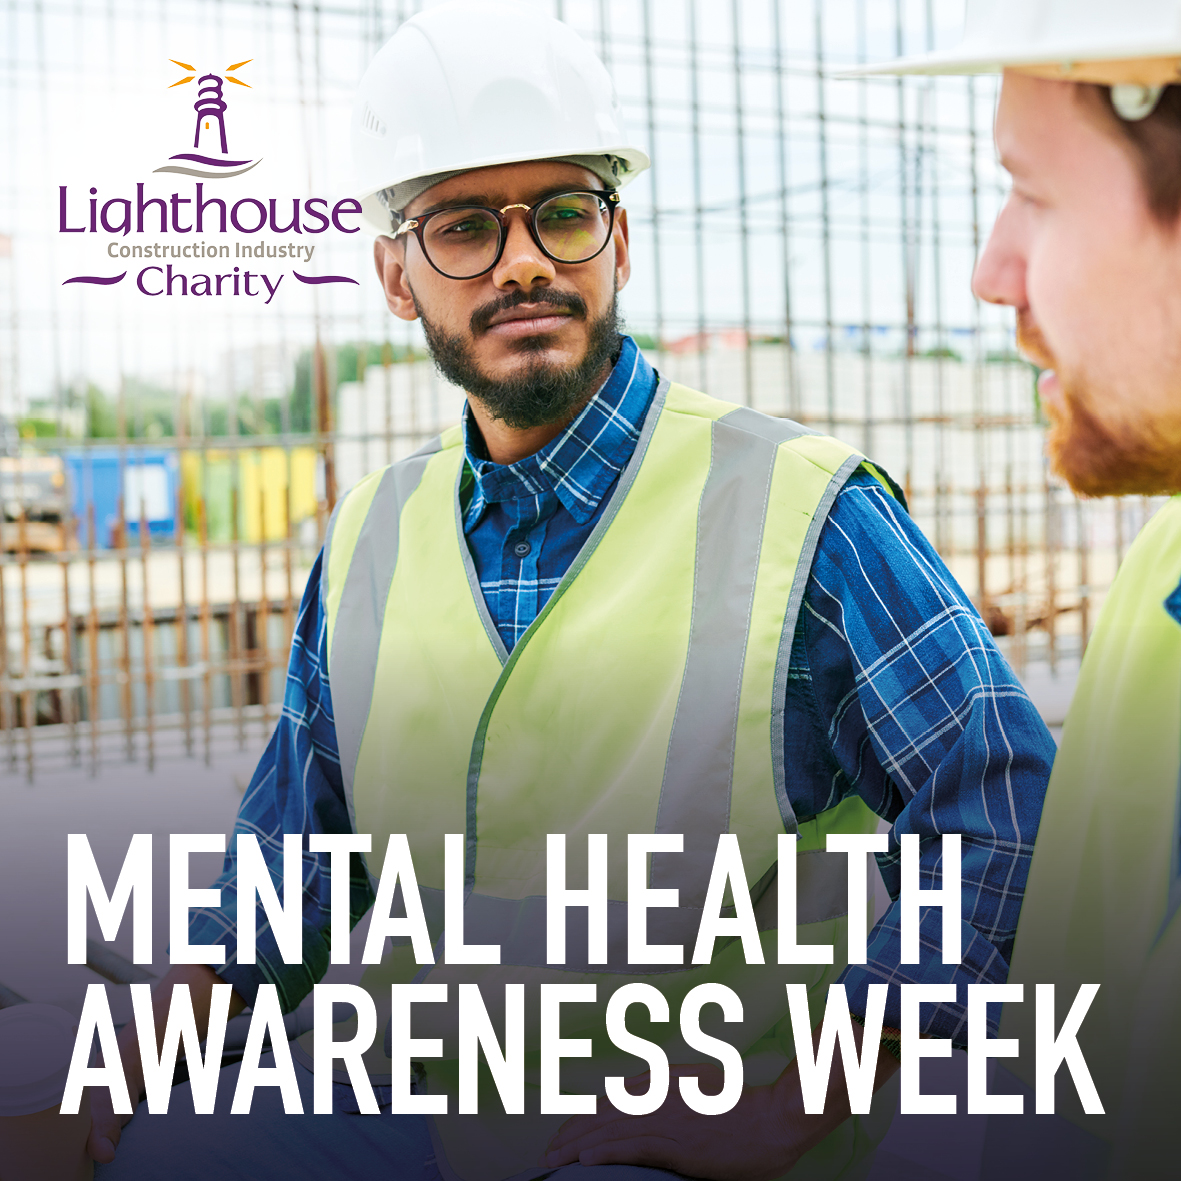 Construction workers in hardhat mental health